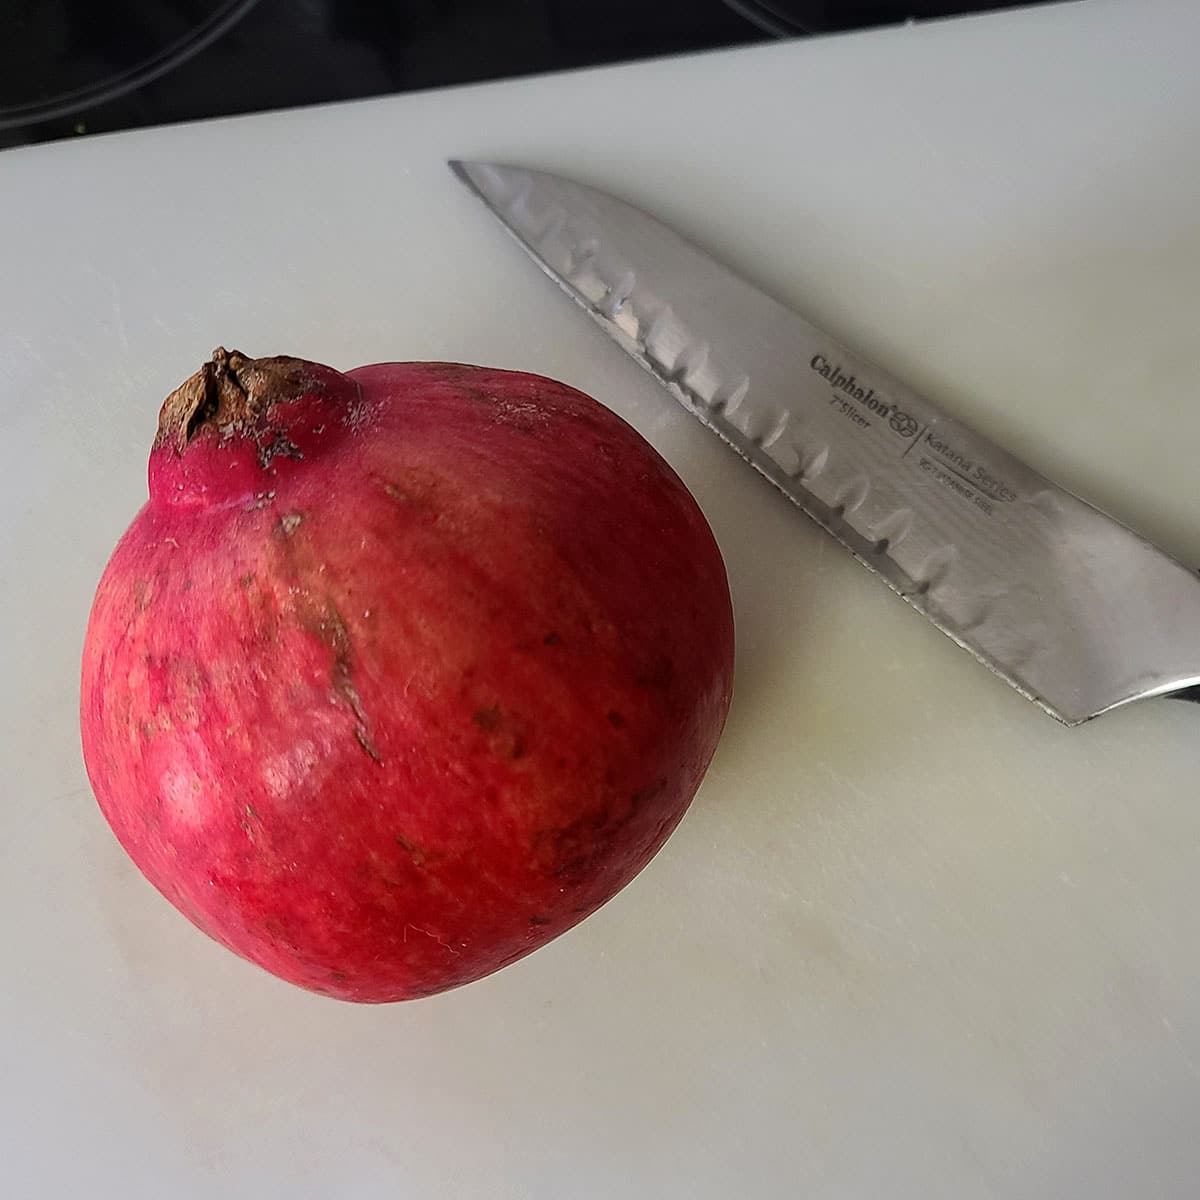 A whole pomegranate and a knife on a cutting board.